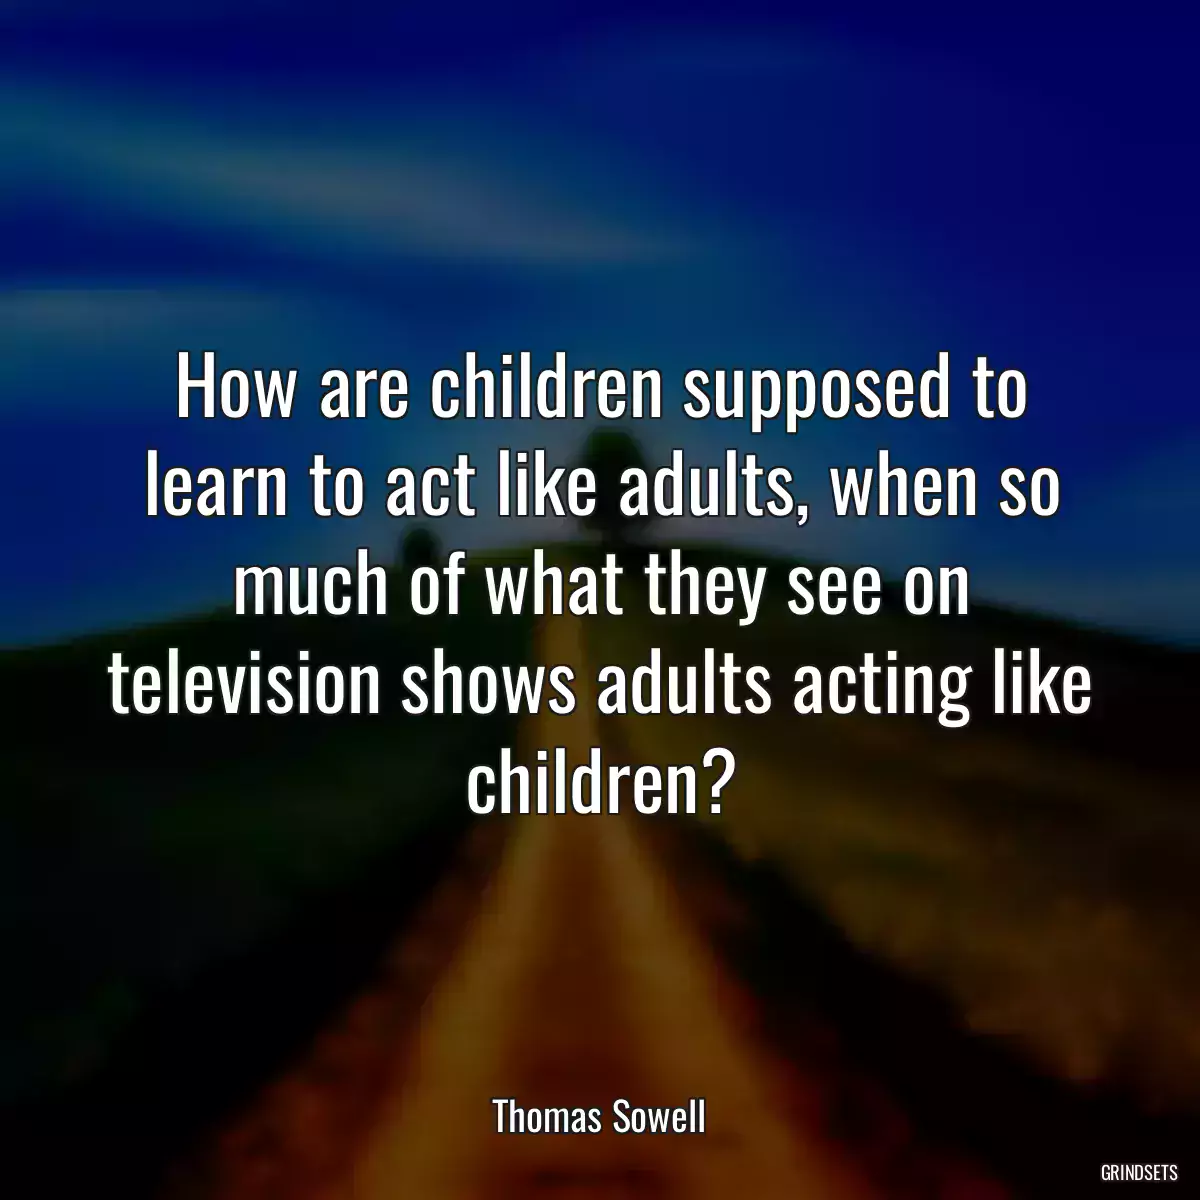 How are children supposed to learn to act like adults, when so much of what they see on television shows adults acting like children?